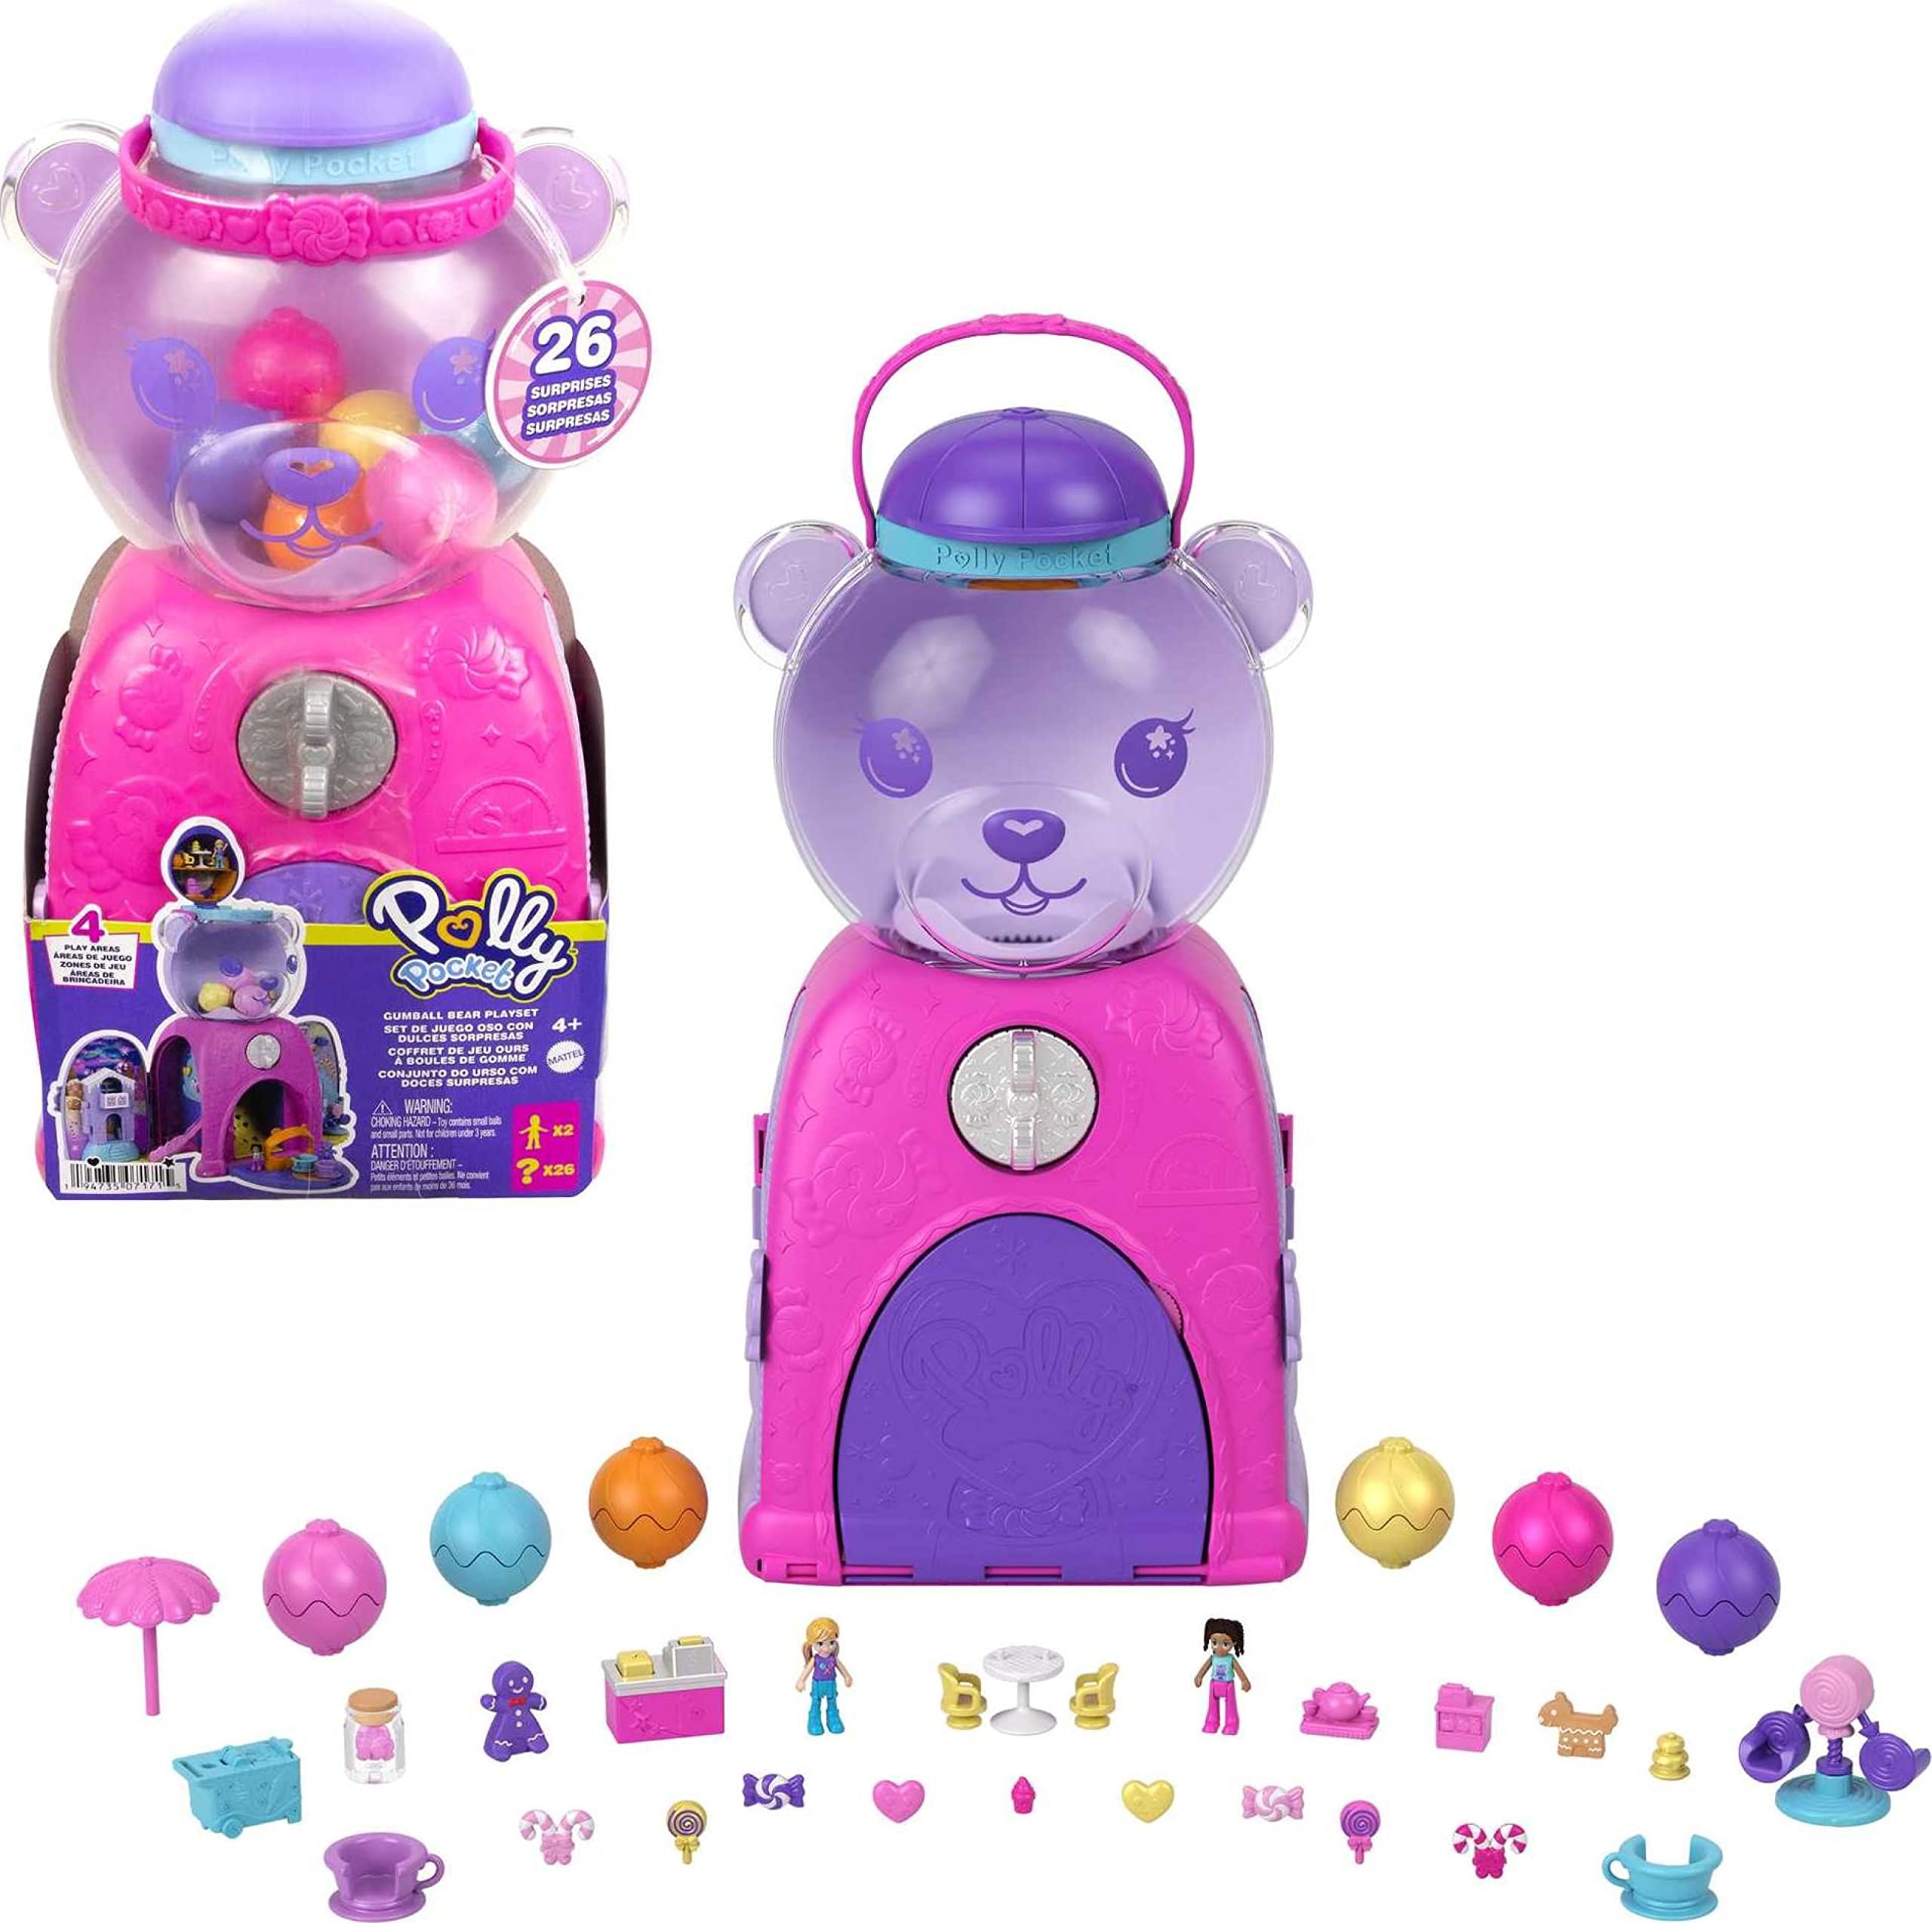 Polly Pocket Travel Toy, Gumball Bear Playset with 2 Micro Dolls and 26 Surprise Accessories, Animal Toy Compact